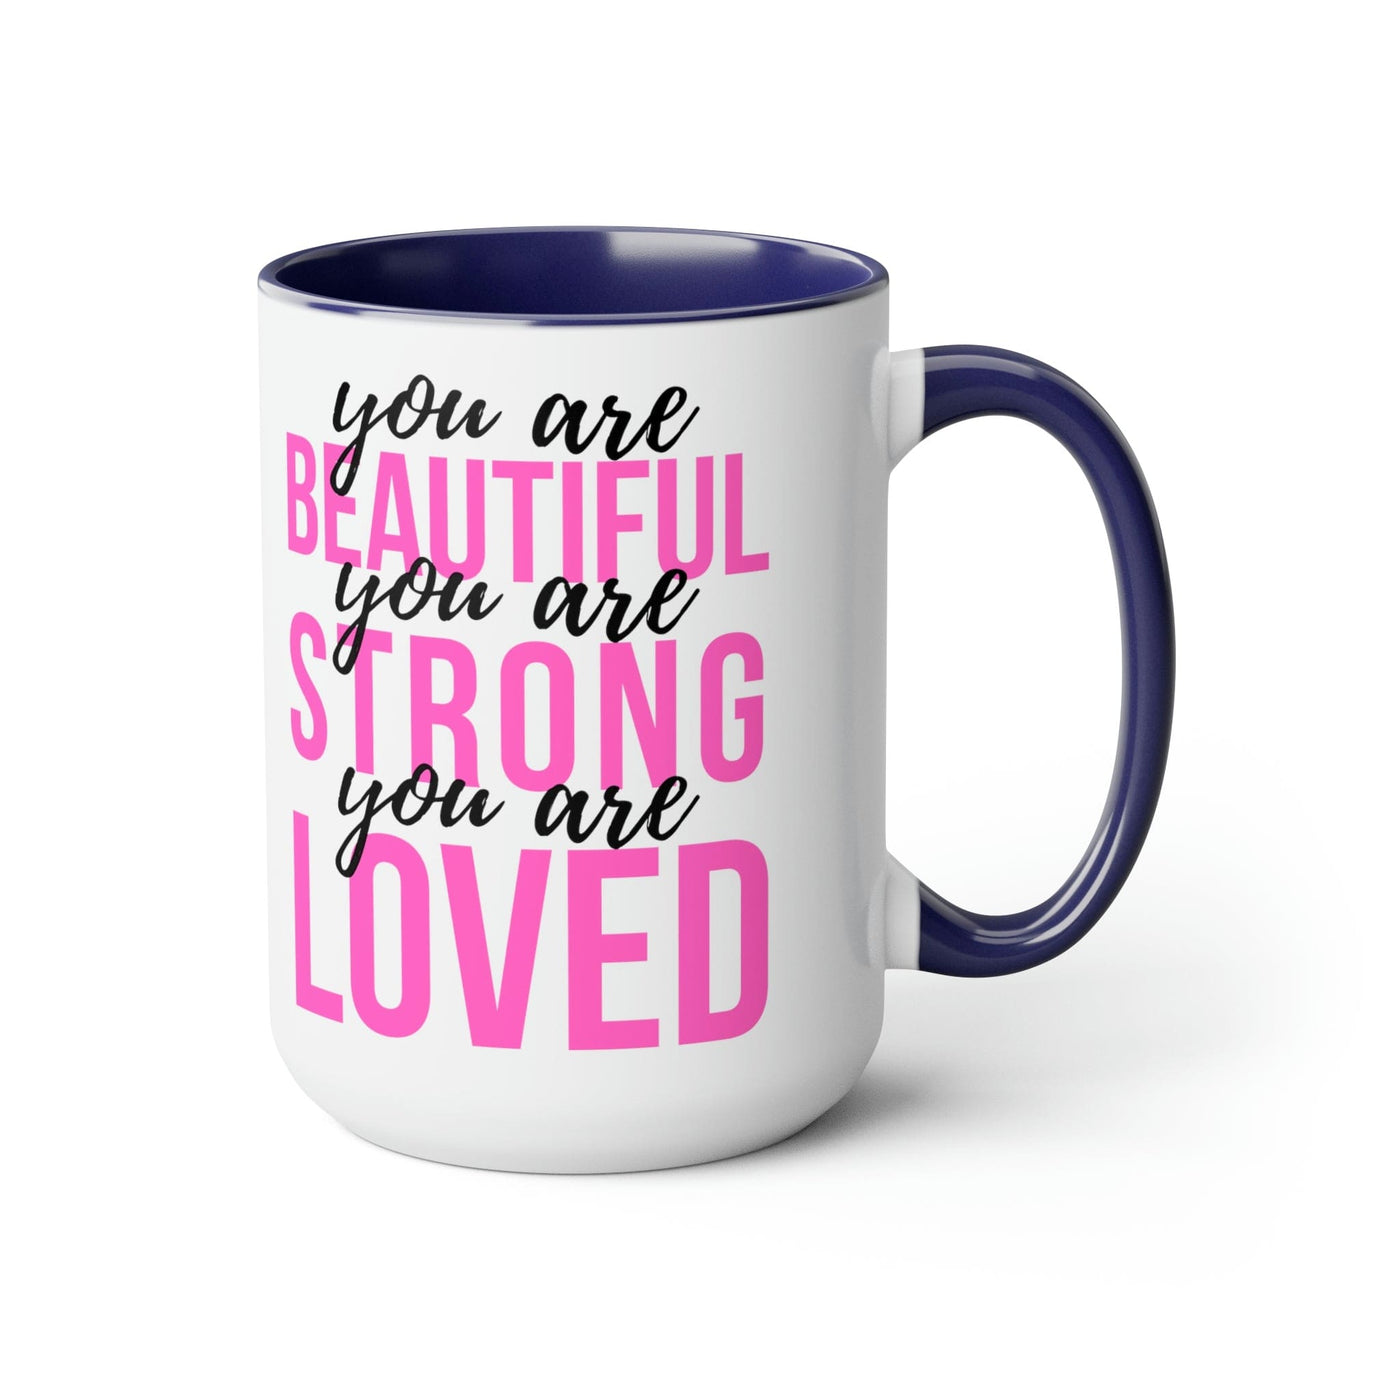 Two-tone Accent Ceramic Coffee Mug 15oz You Are Beautiful Strong Loved